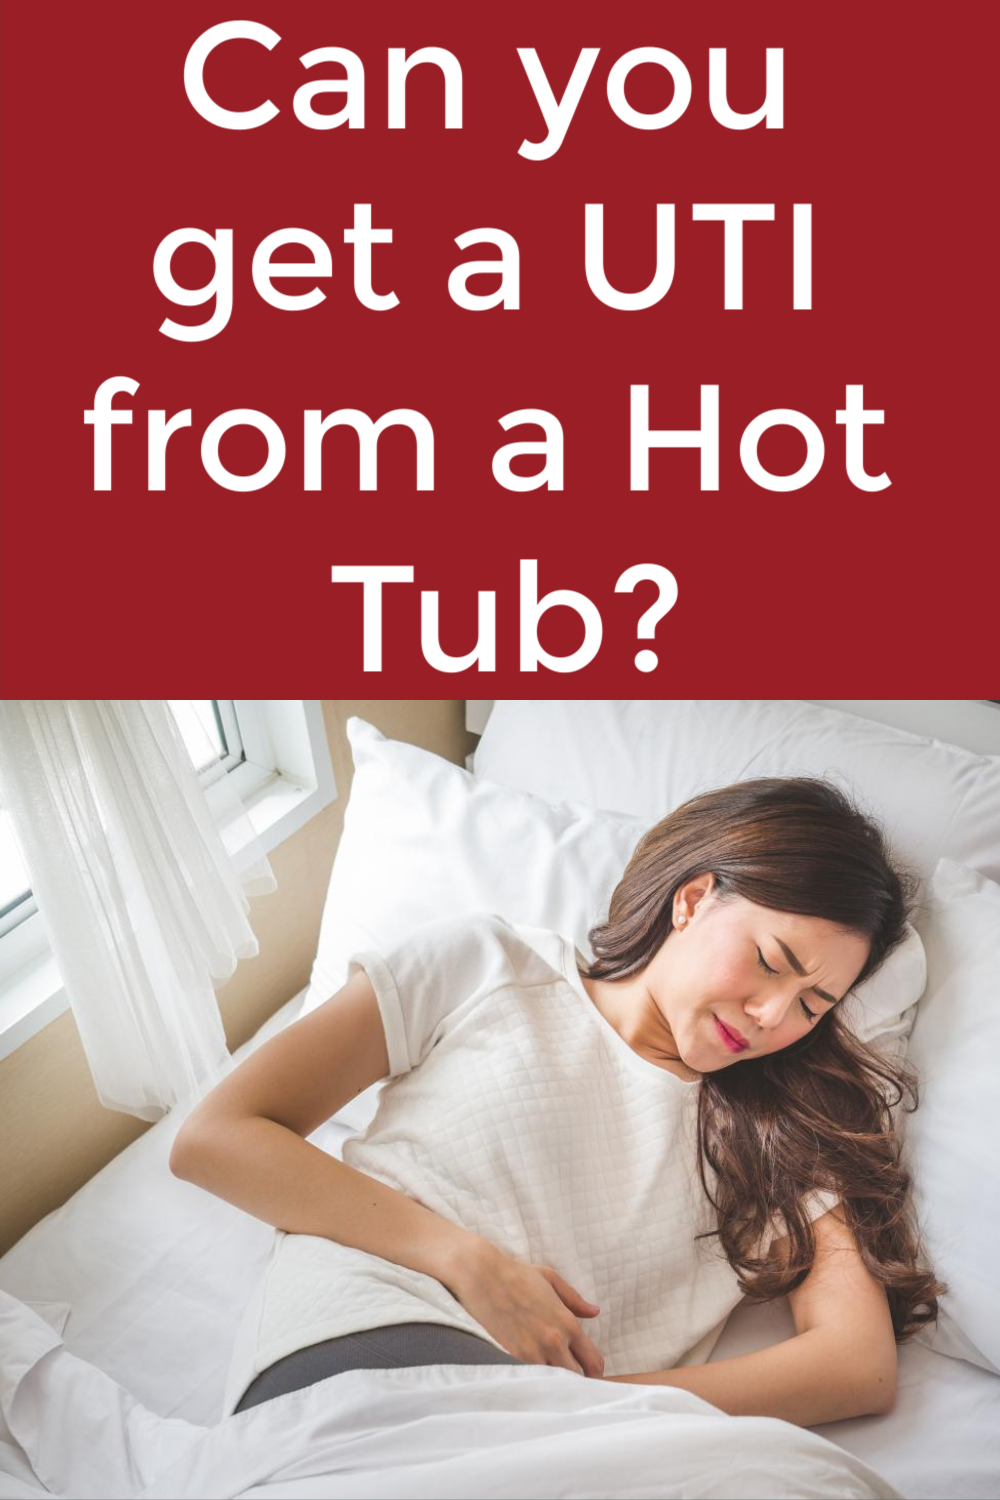 Can you get a UTI from a Hot Tub?